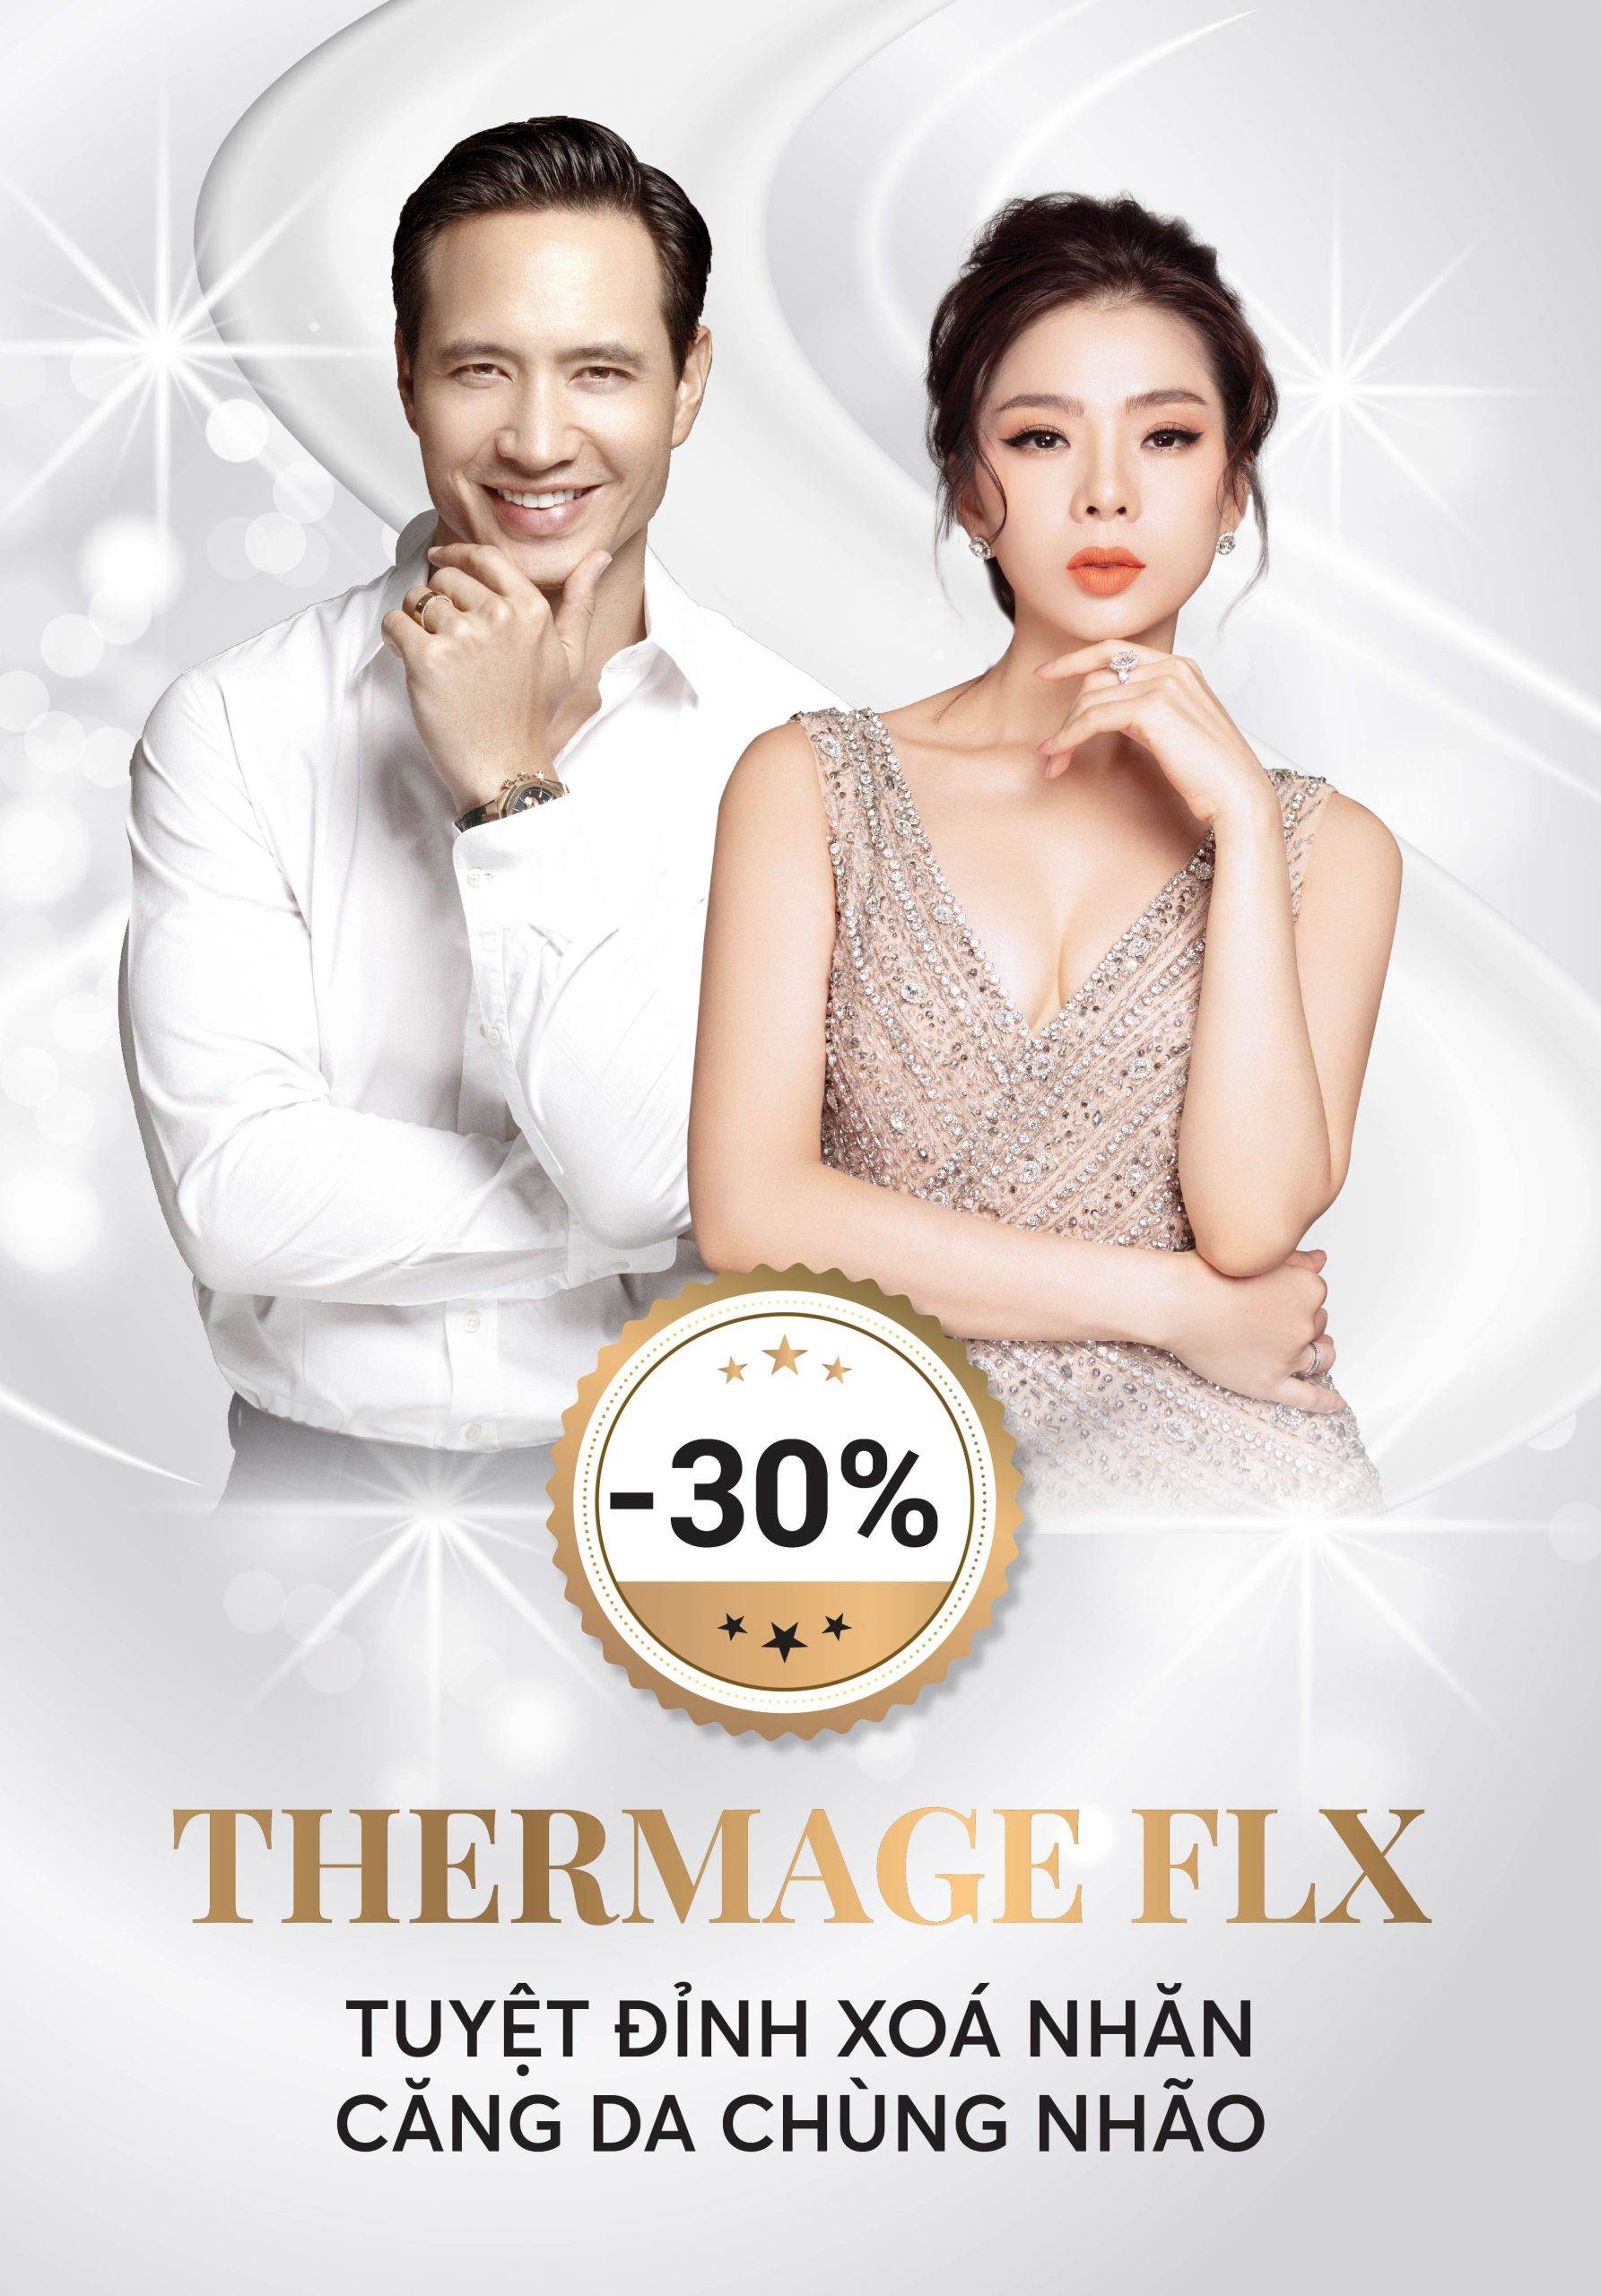 mobile-thermage-flx